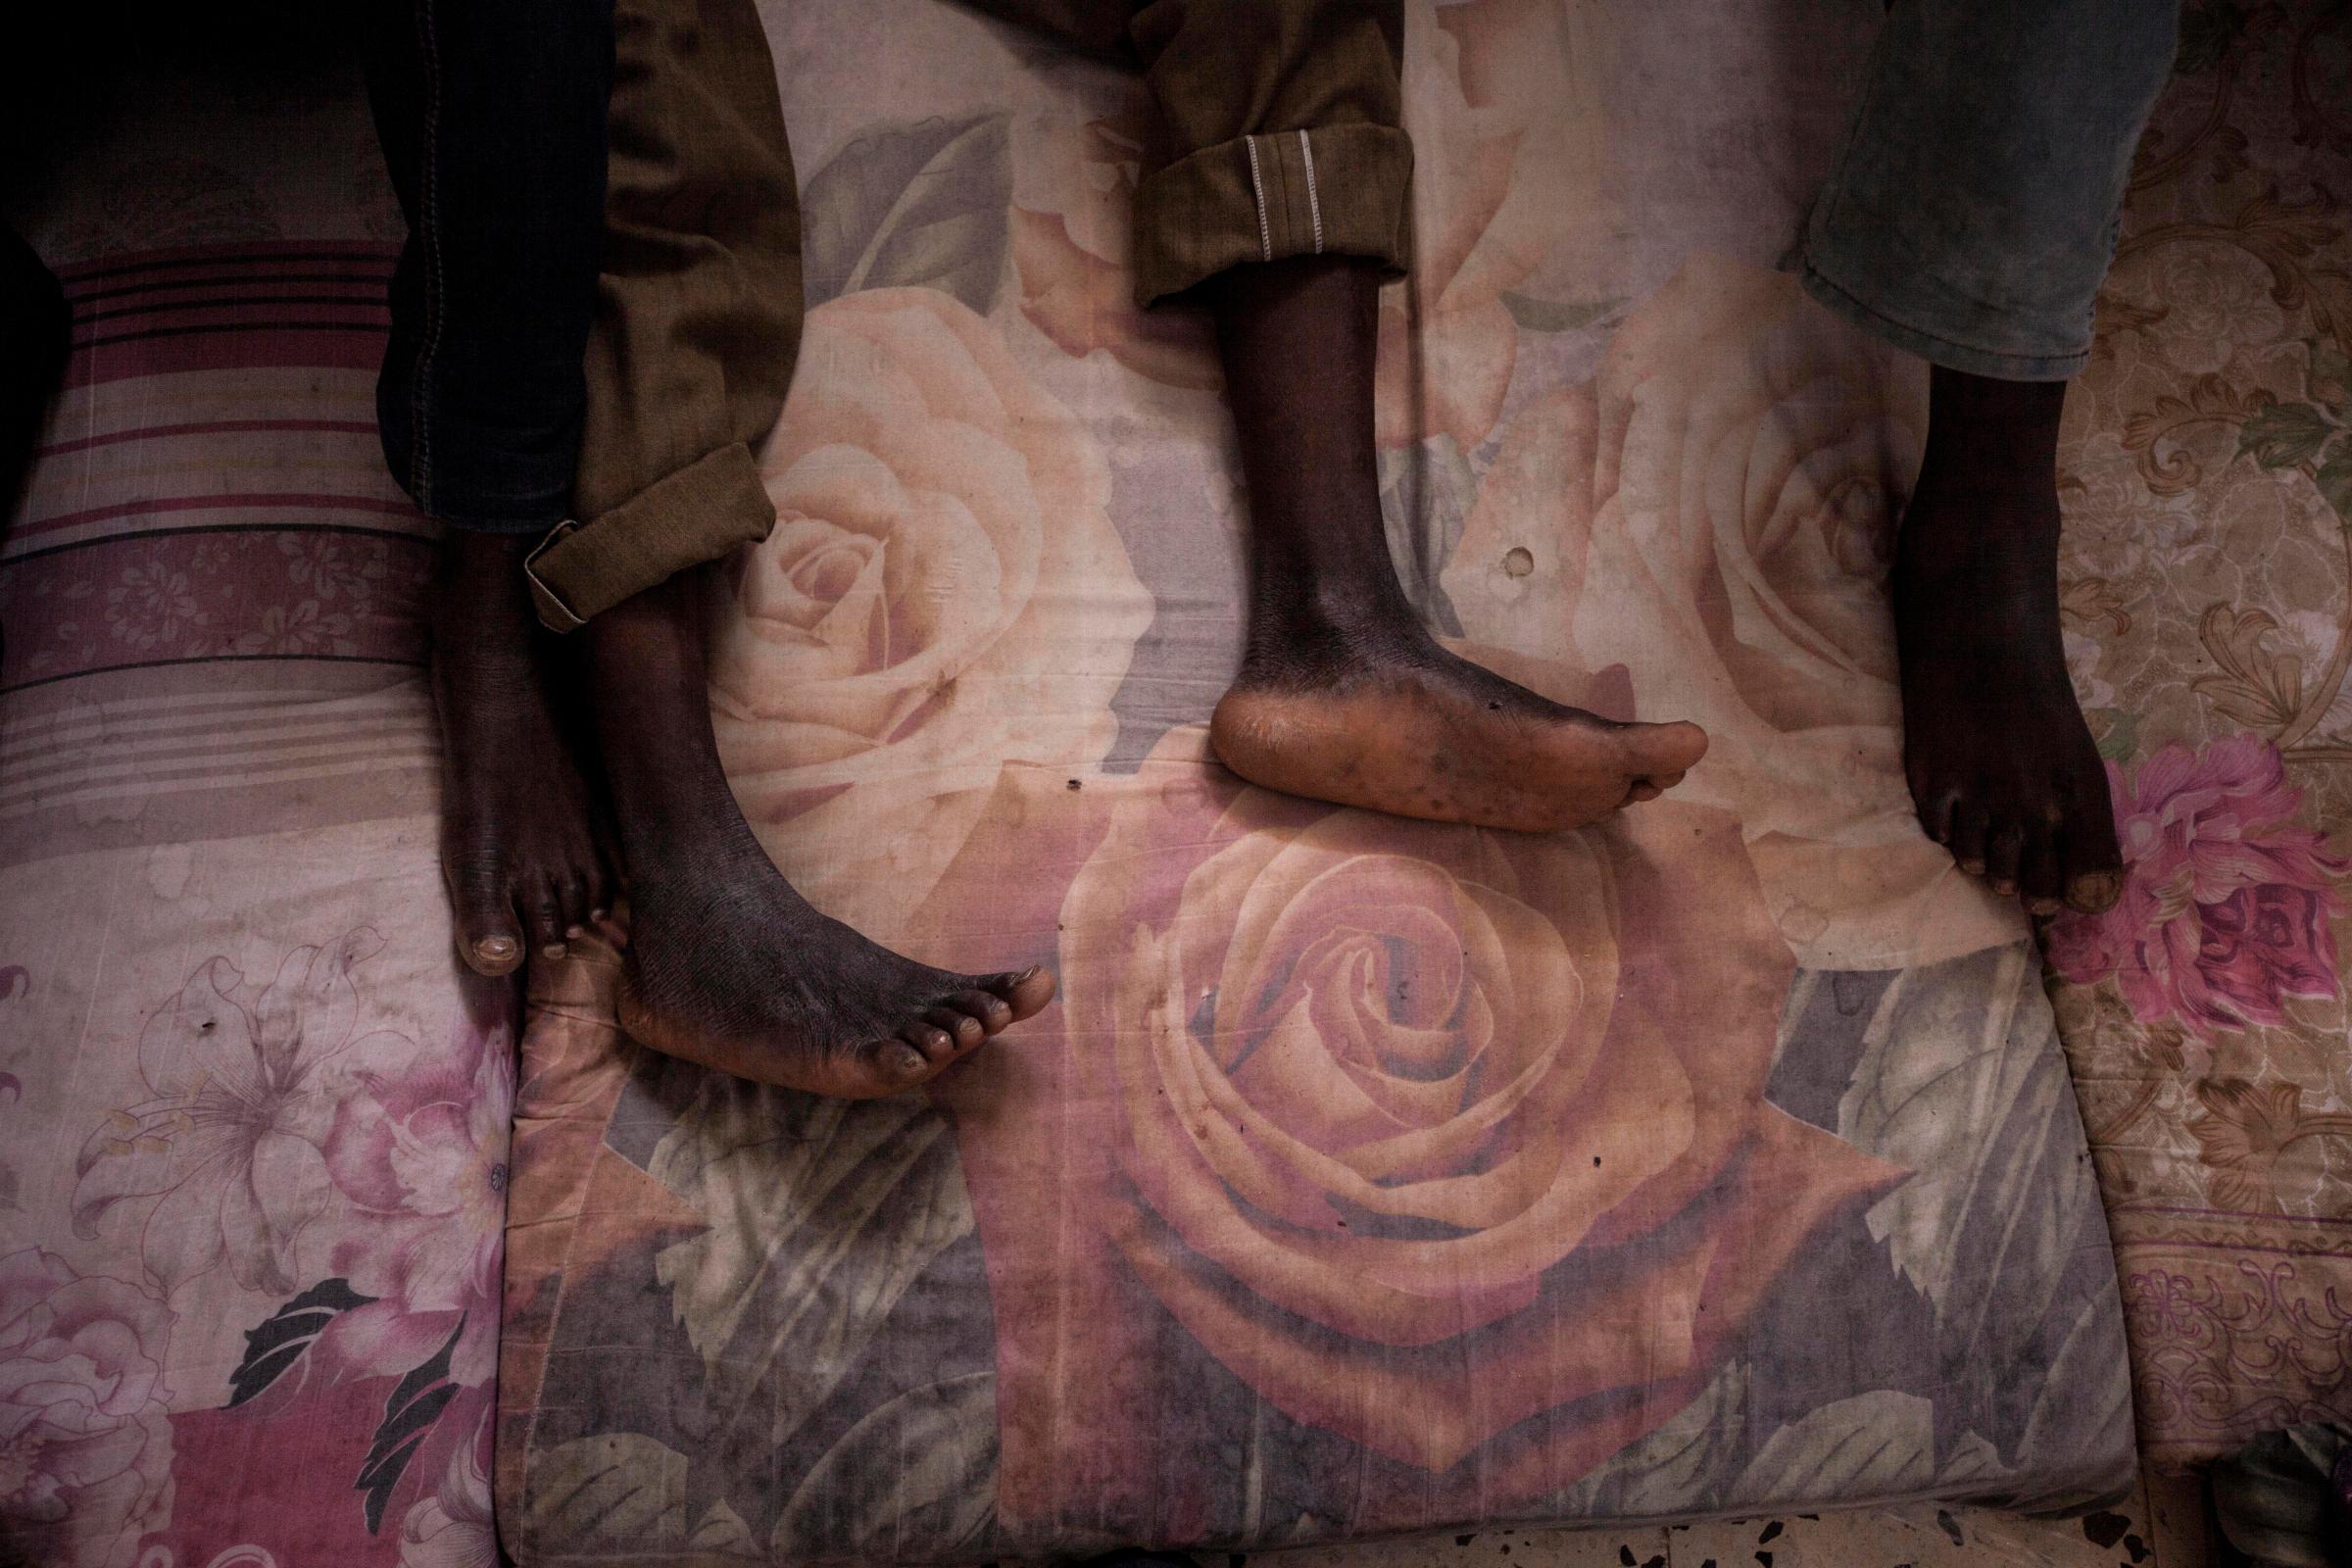 Migrants rest on mattresses in the male section of a detention center in Surman, Libya.